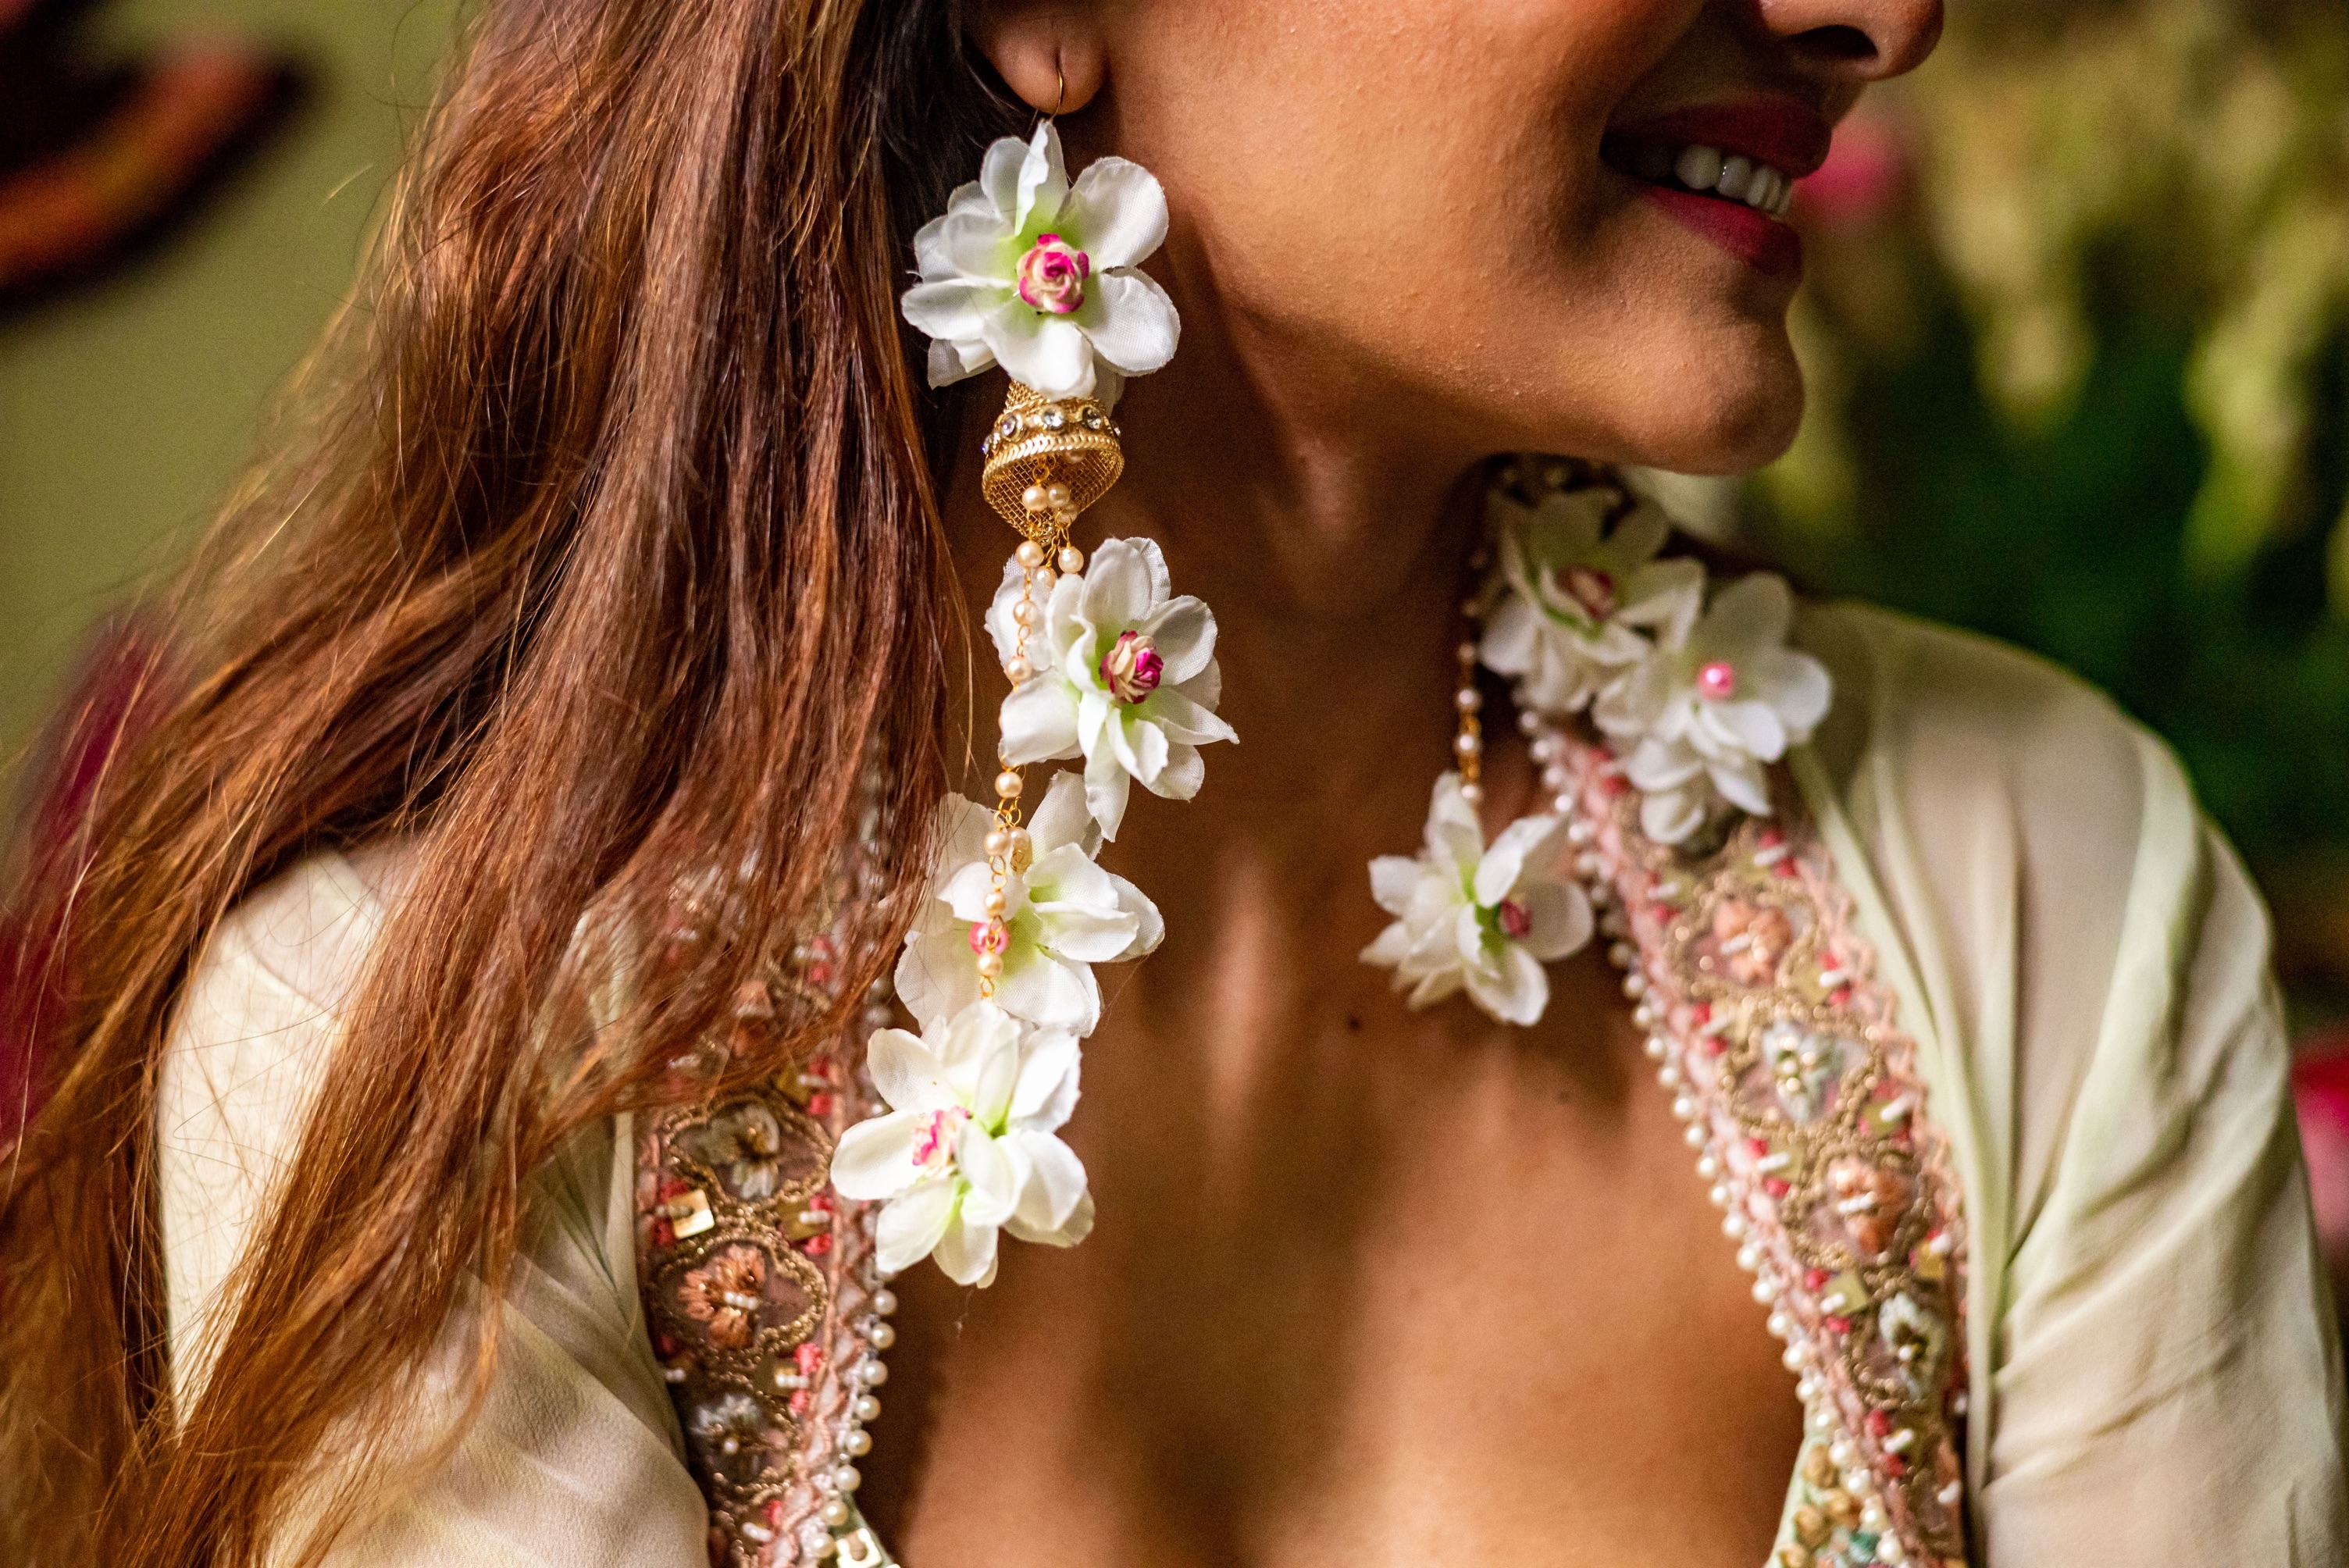 Floral art | White Floral Long Earing for Women undefined